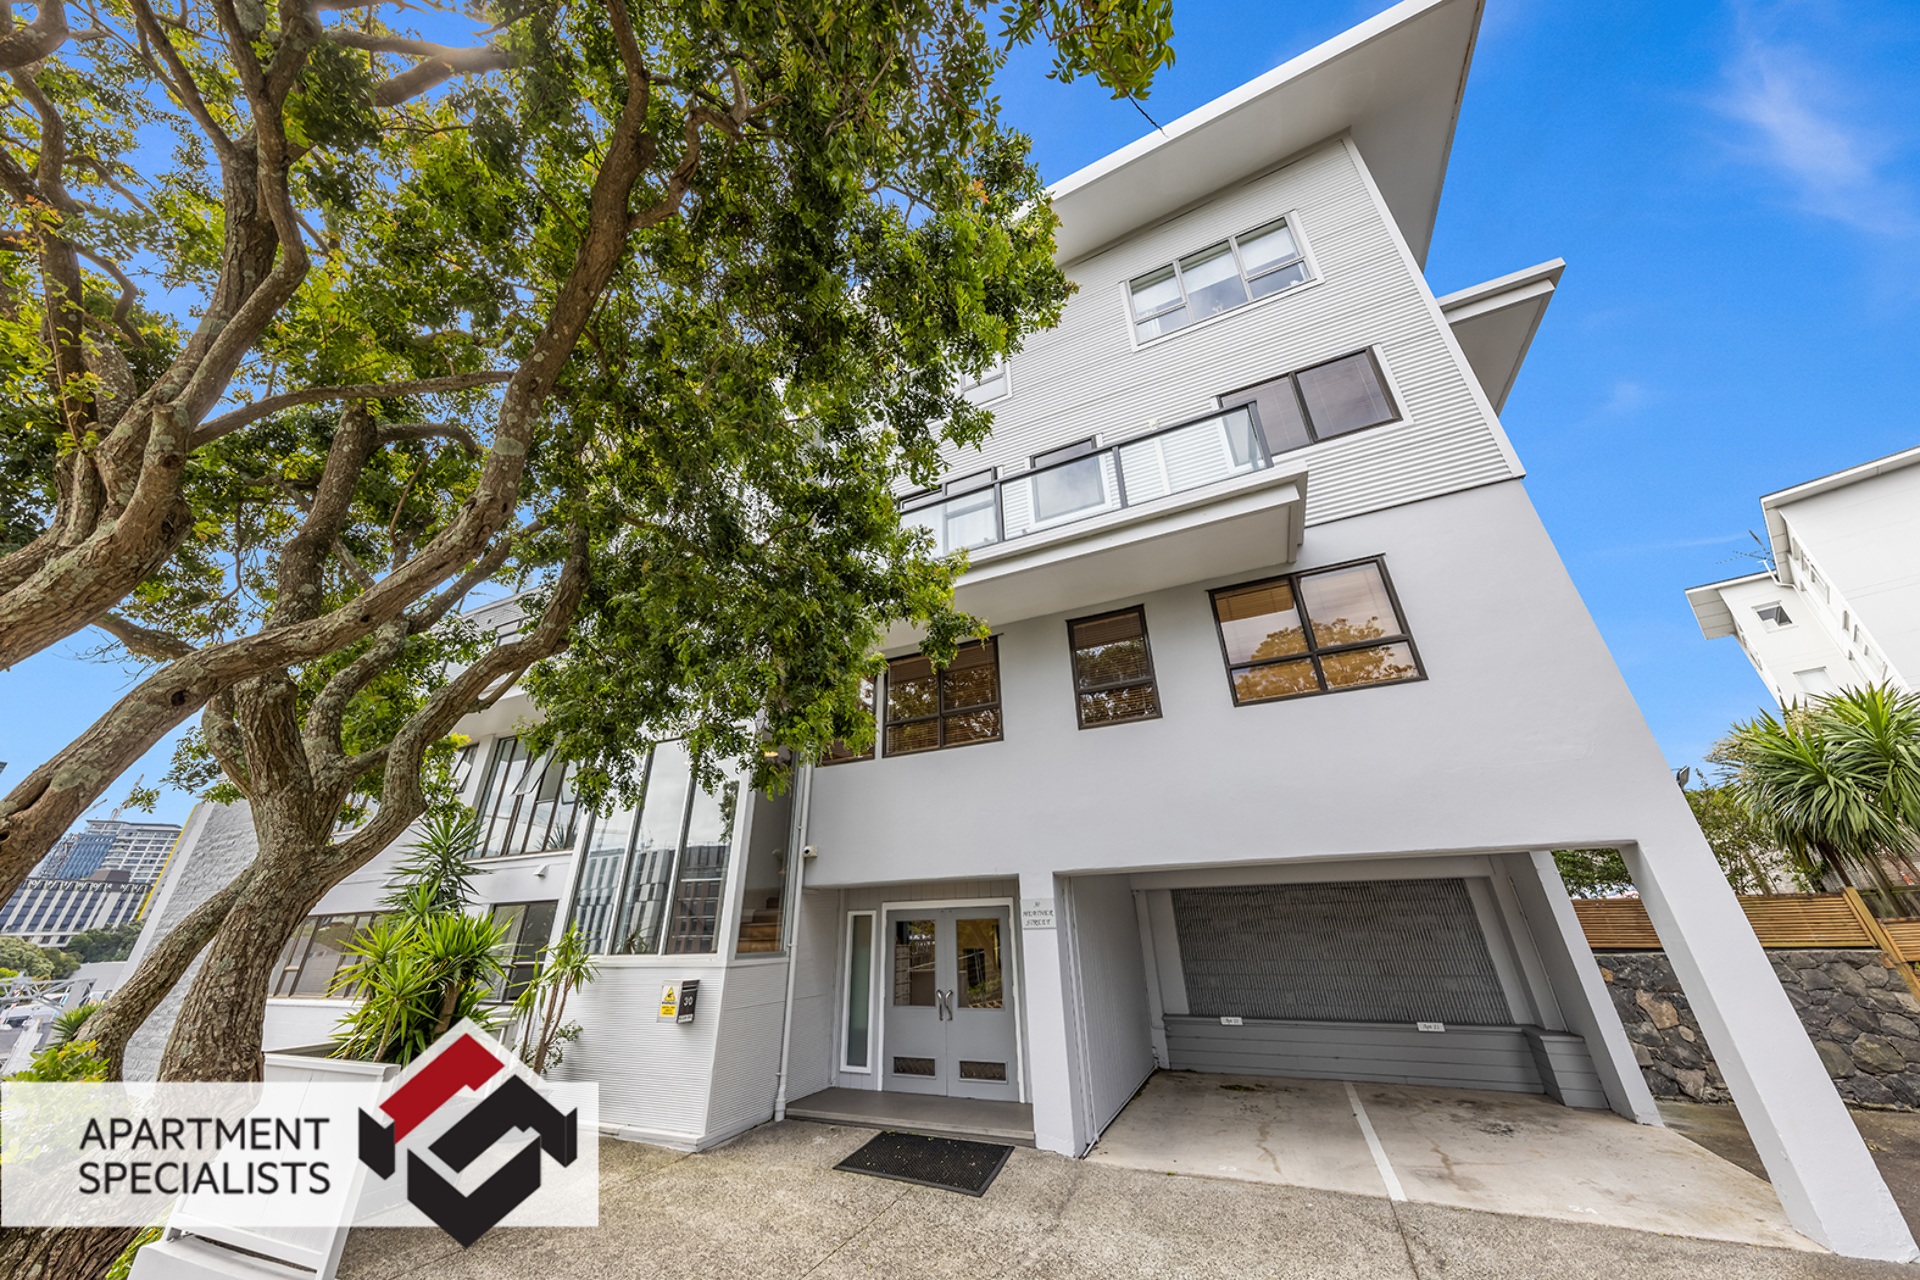 18 | 30 Heather Street, Parnell | Apartment Specialists